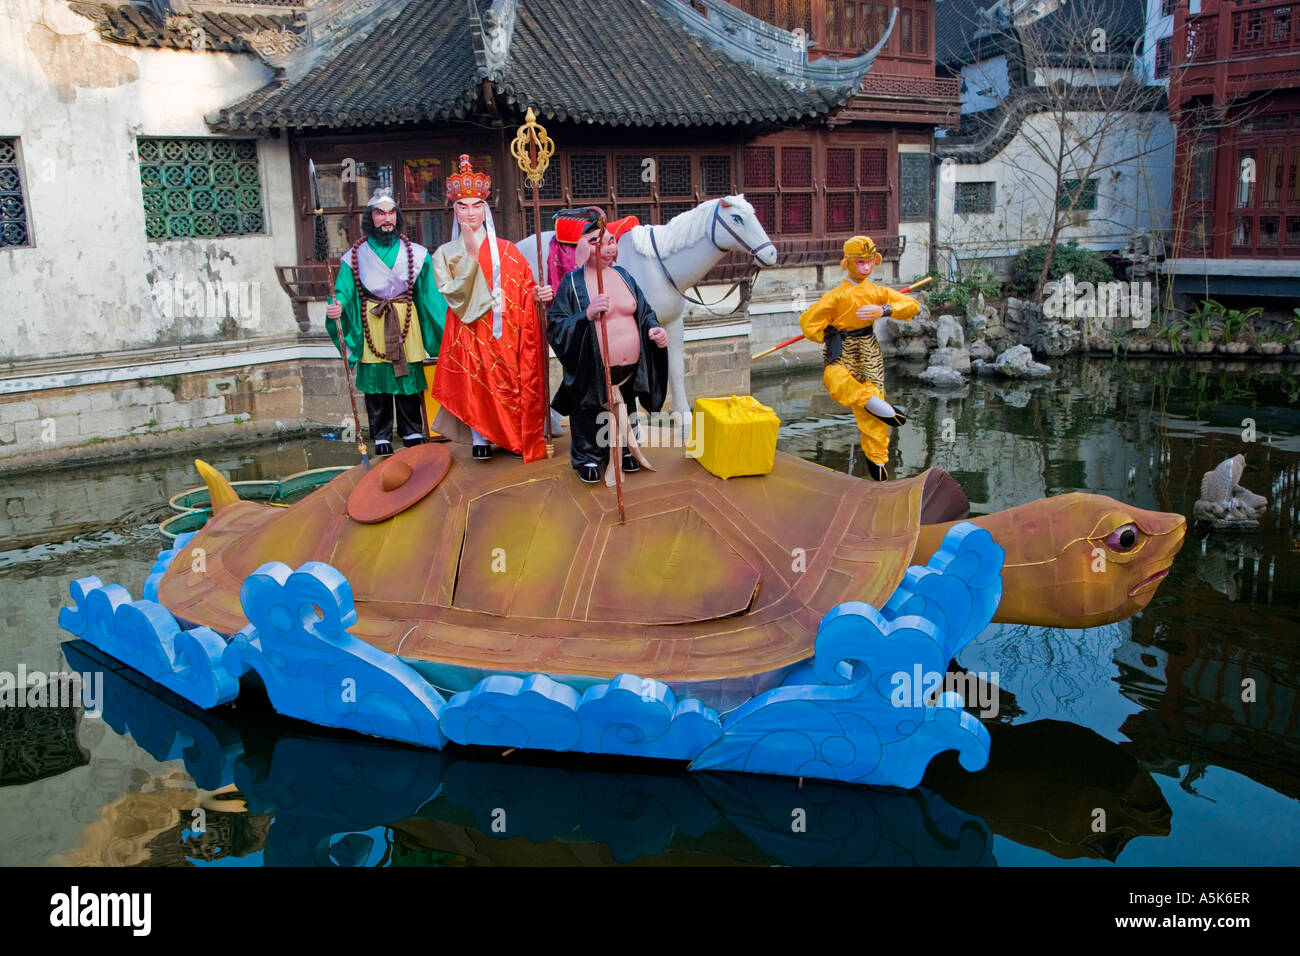 Characters on tortoise float in Yu Yuan Gardens Shanghai, Chinese New Year February 2007, year of the Pig JMH2349 Stock Photo